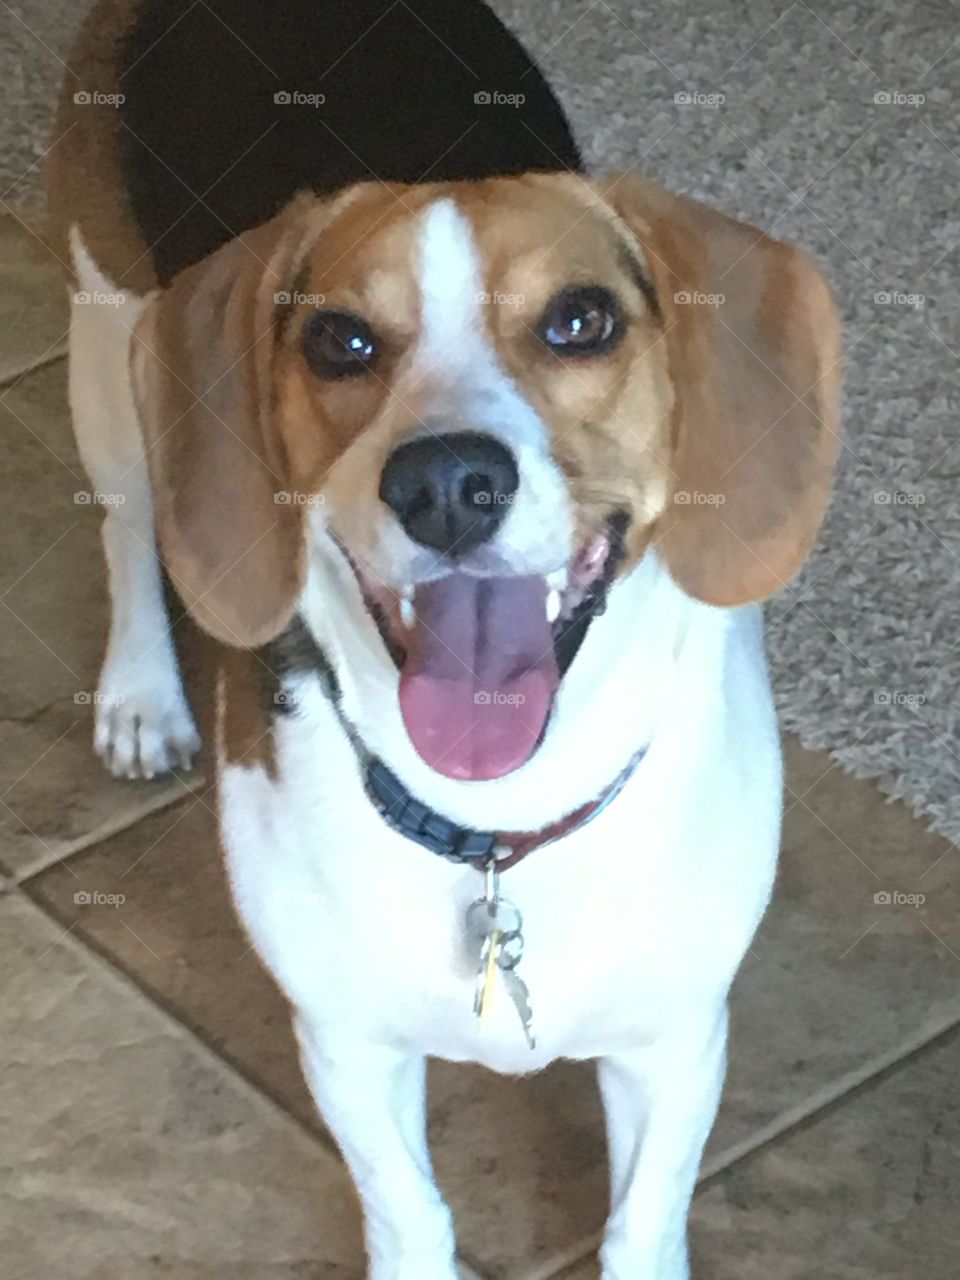 This beagle was so happy to play